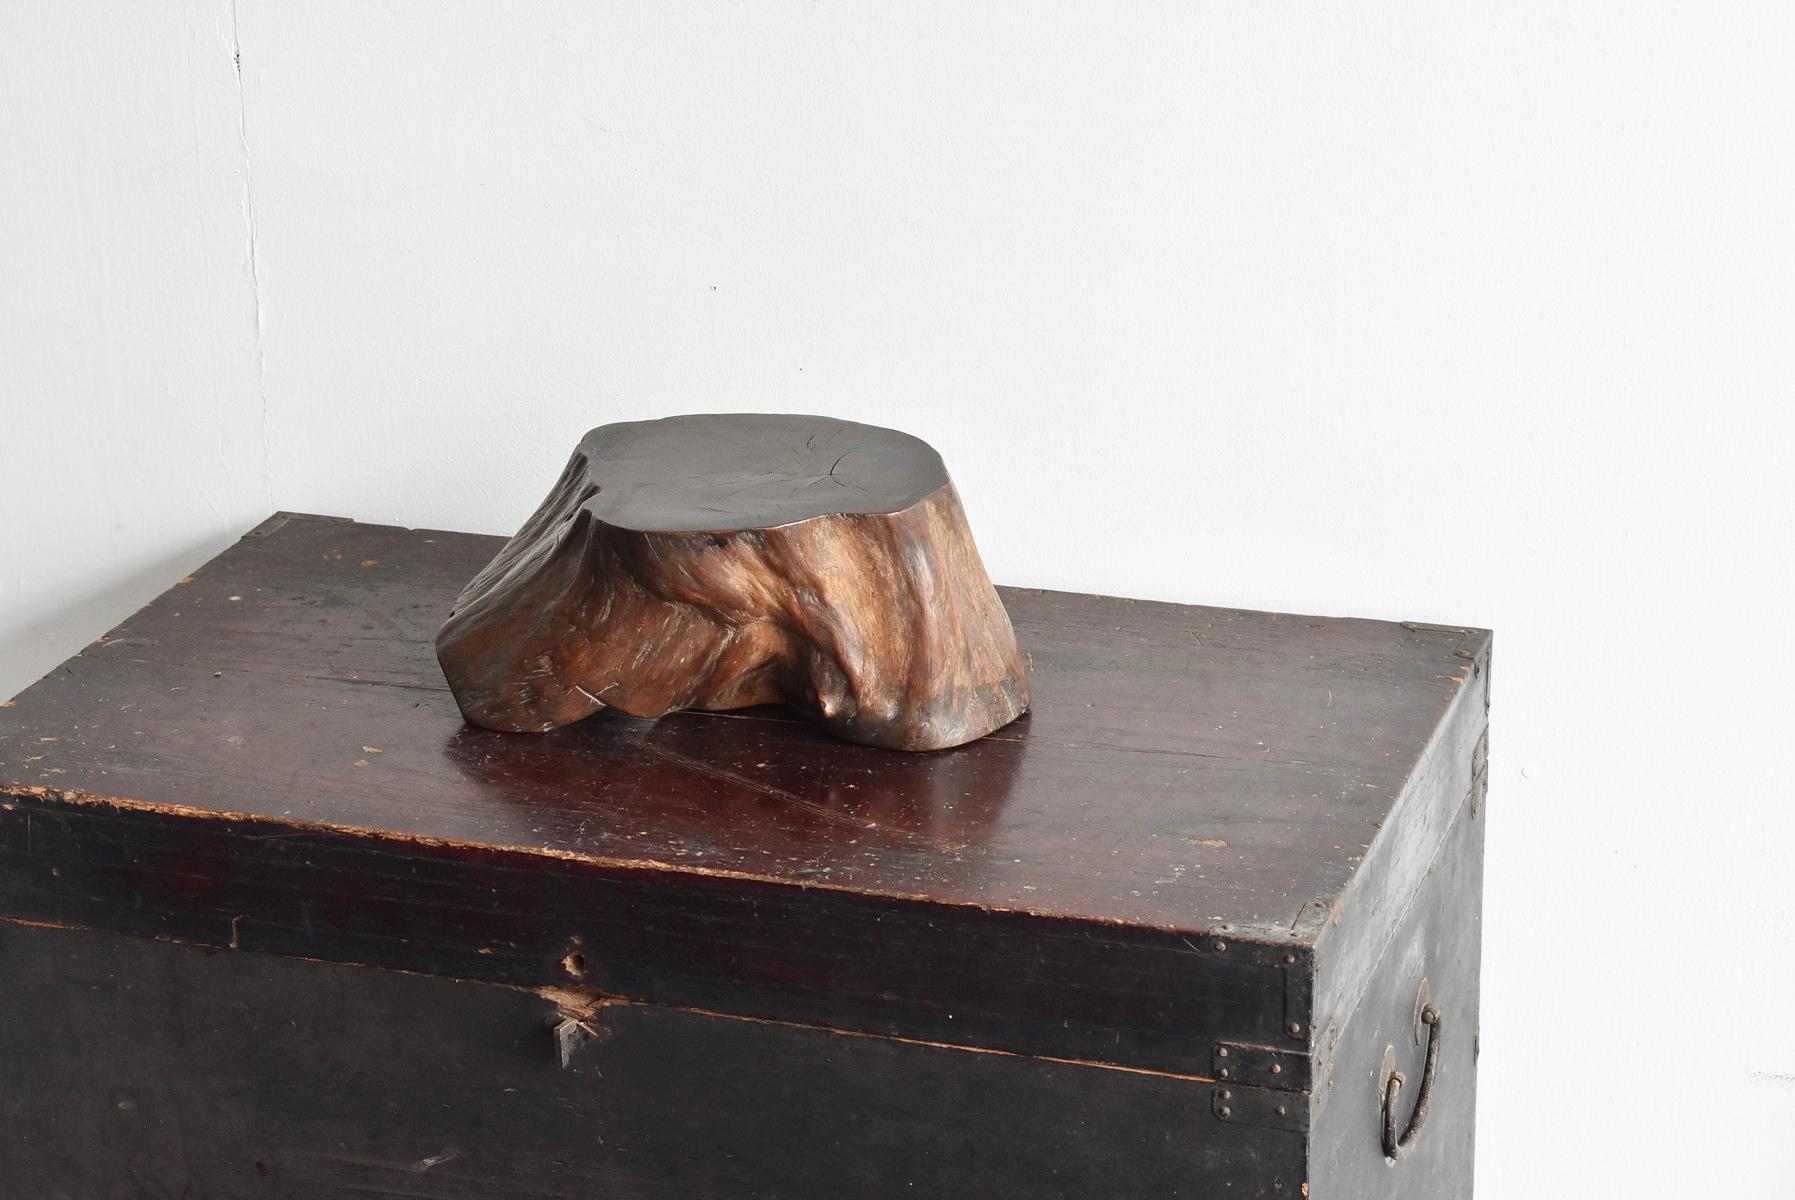 It is a small stump stand of the Showa period in Japan.
I think it was made to put incense burners and bonsai.

The type of wood is unknown, but it is hard and heavy.
It is a work that makes use of the expression of wood as it is.

It's very